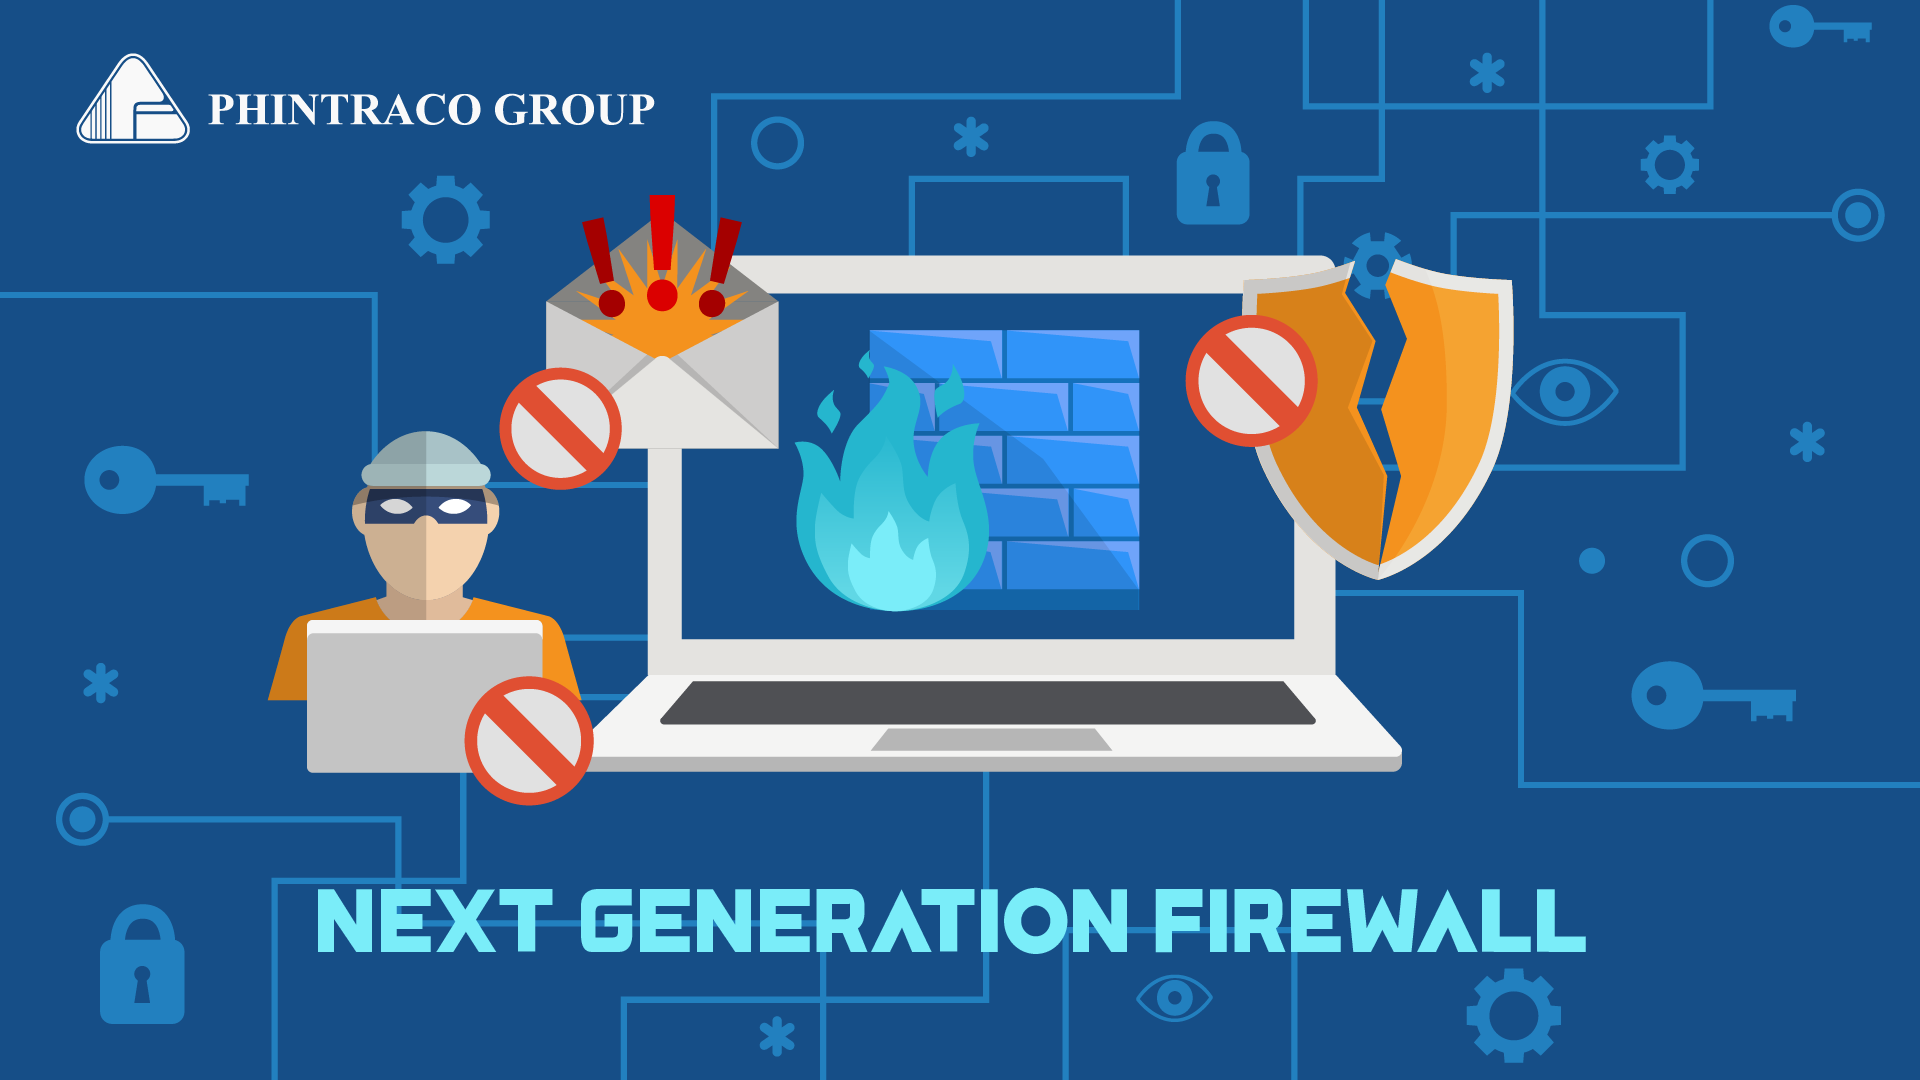 Next-Generation Firewall, the Advanced Technology for Network Security